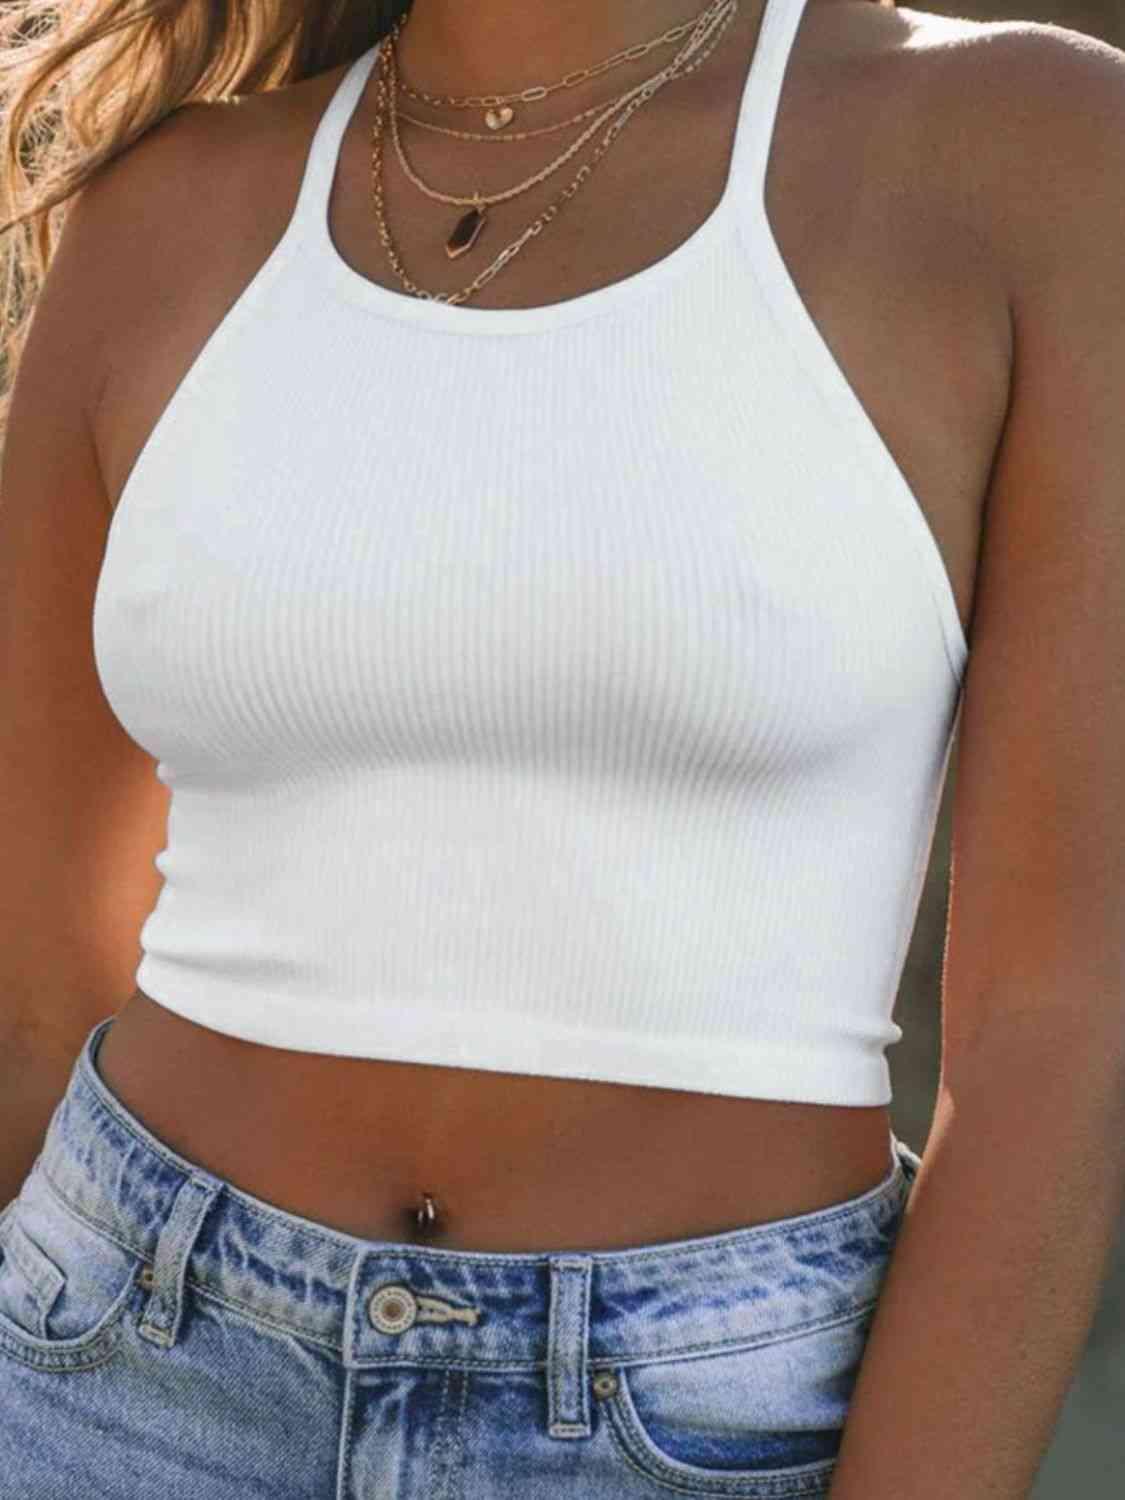 a woman wearing a white crop top and jeans